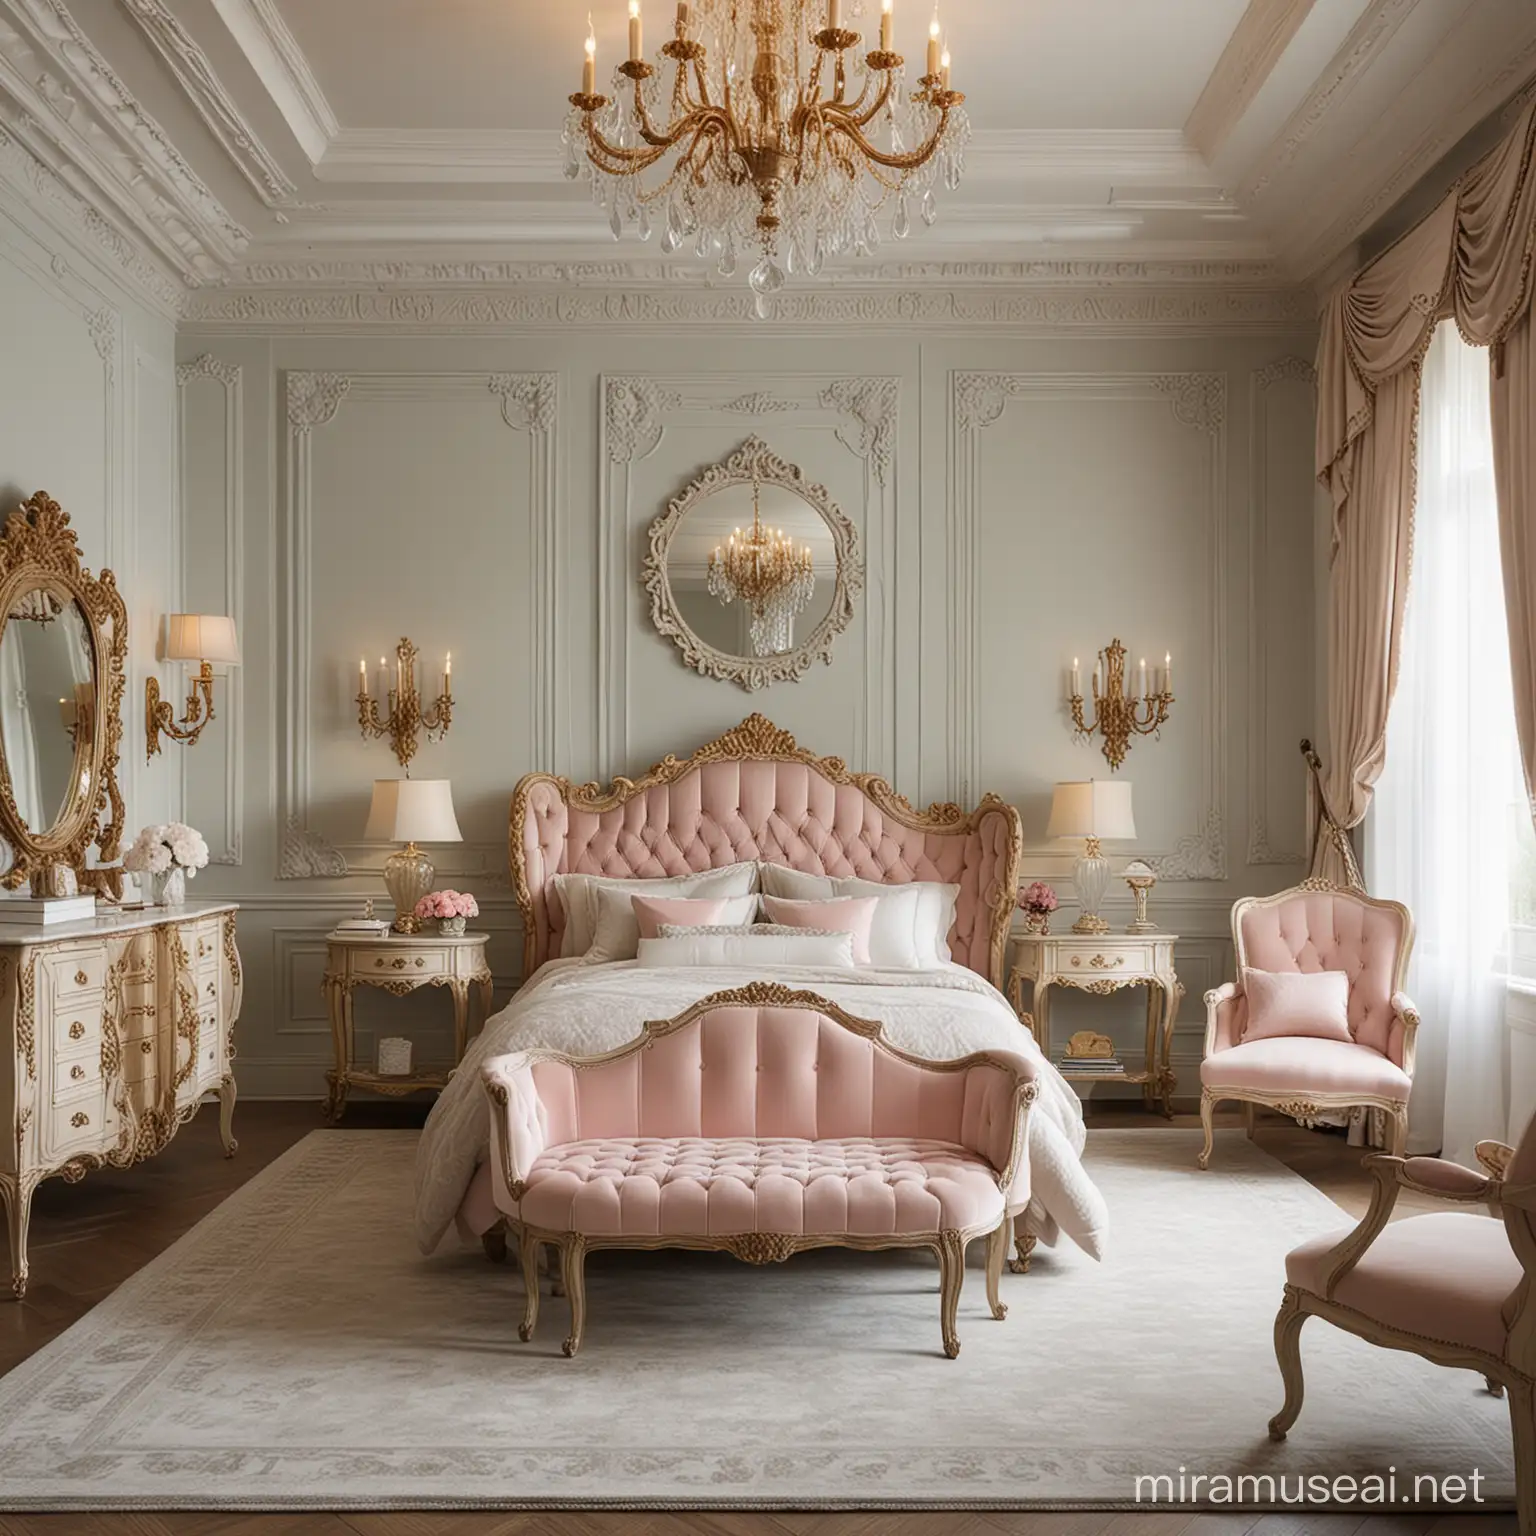 Luxurious French Baroque Bedroom with Modern Twist Opulent Living in 400 sq ft Space